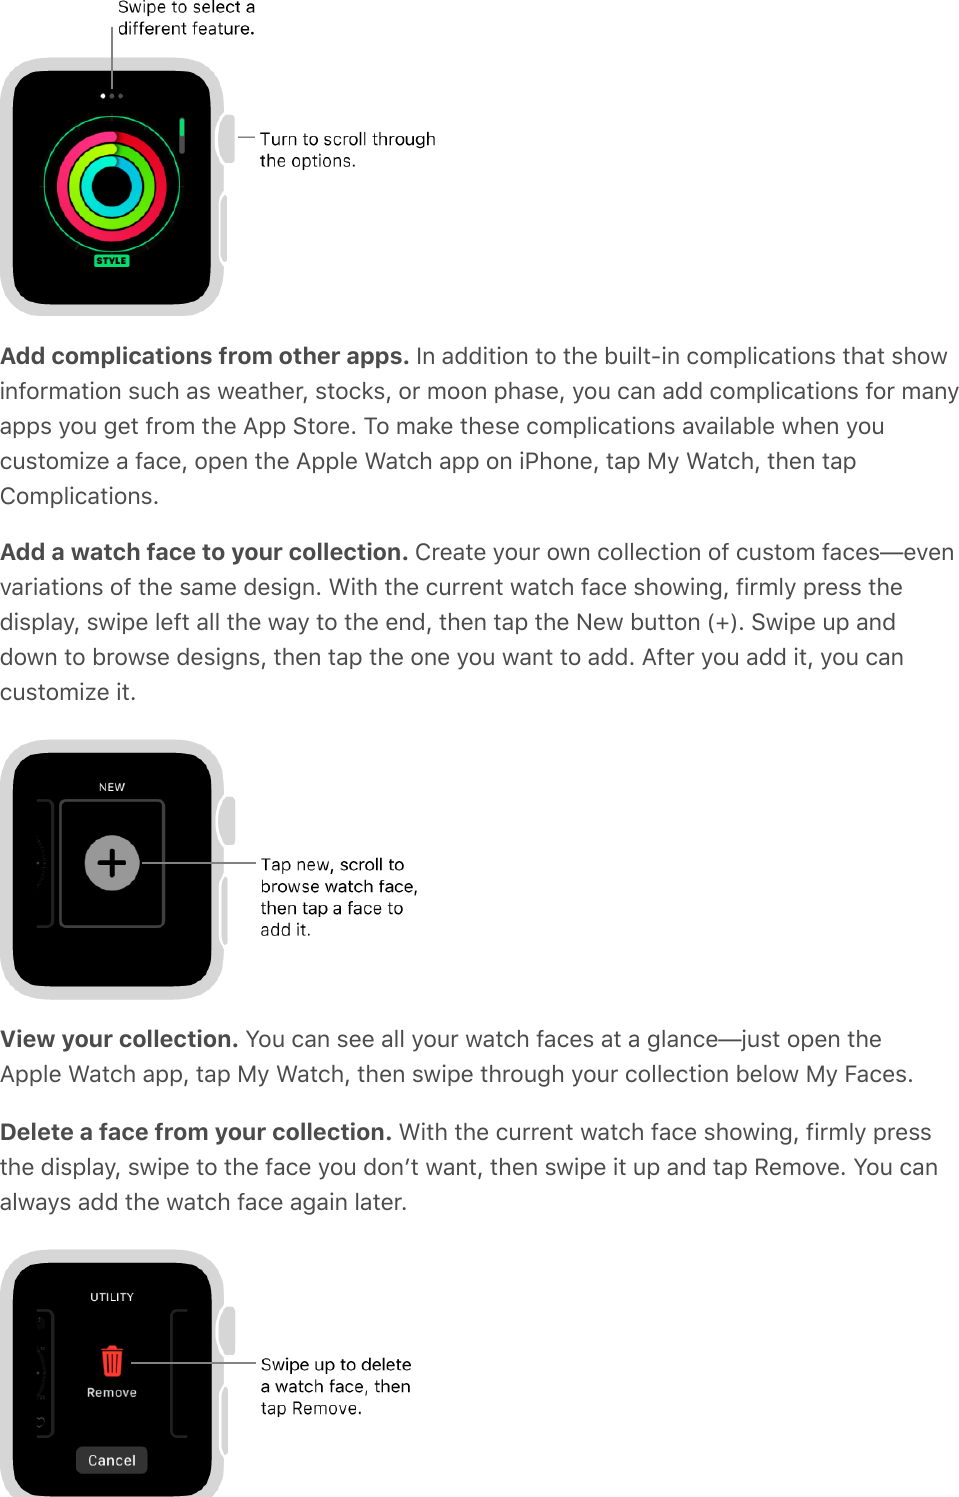 Add complications from other apps. In addition to the built-in complications that showinformation such as weather, stocks, or moon phase, you can add complications for manyapps you get from the App Store. To make these complications available when youcustomize a face, open the Apple Watch app on iPhone, tap My Watch, then tapComplications.Add a watch face to your collection. Create your own collection of custom faces—evenvariations of the same design. With the current watch face showing, firmly press thedisplay, swipe left all the way to the end, then tap the New button (+). Swipe up anddown to browse designs, then tap the one you want to add. After you add it, you cancustomize it.View your collection. You can see all your watch faces at a glance—just open theApple Watch app, tap My Watch, then swipe through your collection below My Faces.Delete a face from your collection. With the current watch face showing, firmly pressthe display, swipe to the face you donʼt want, then swipe it up and tap Remove. You canalways add the watch face again later.